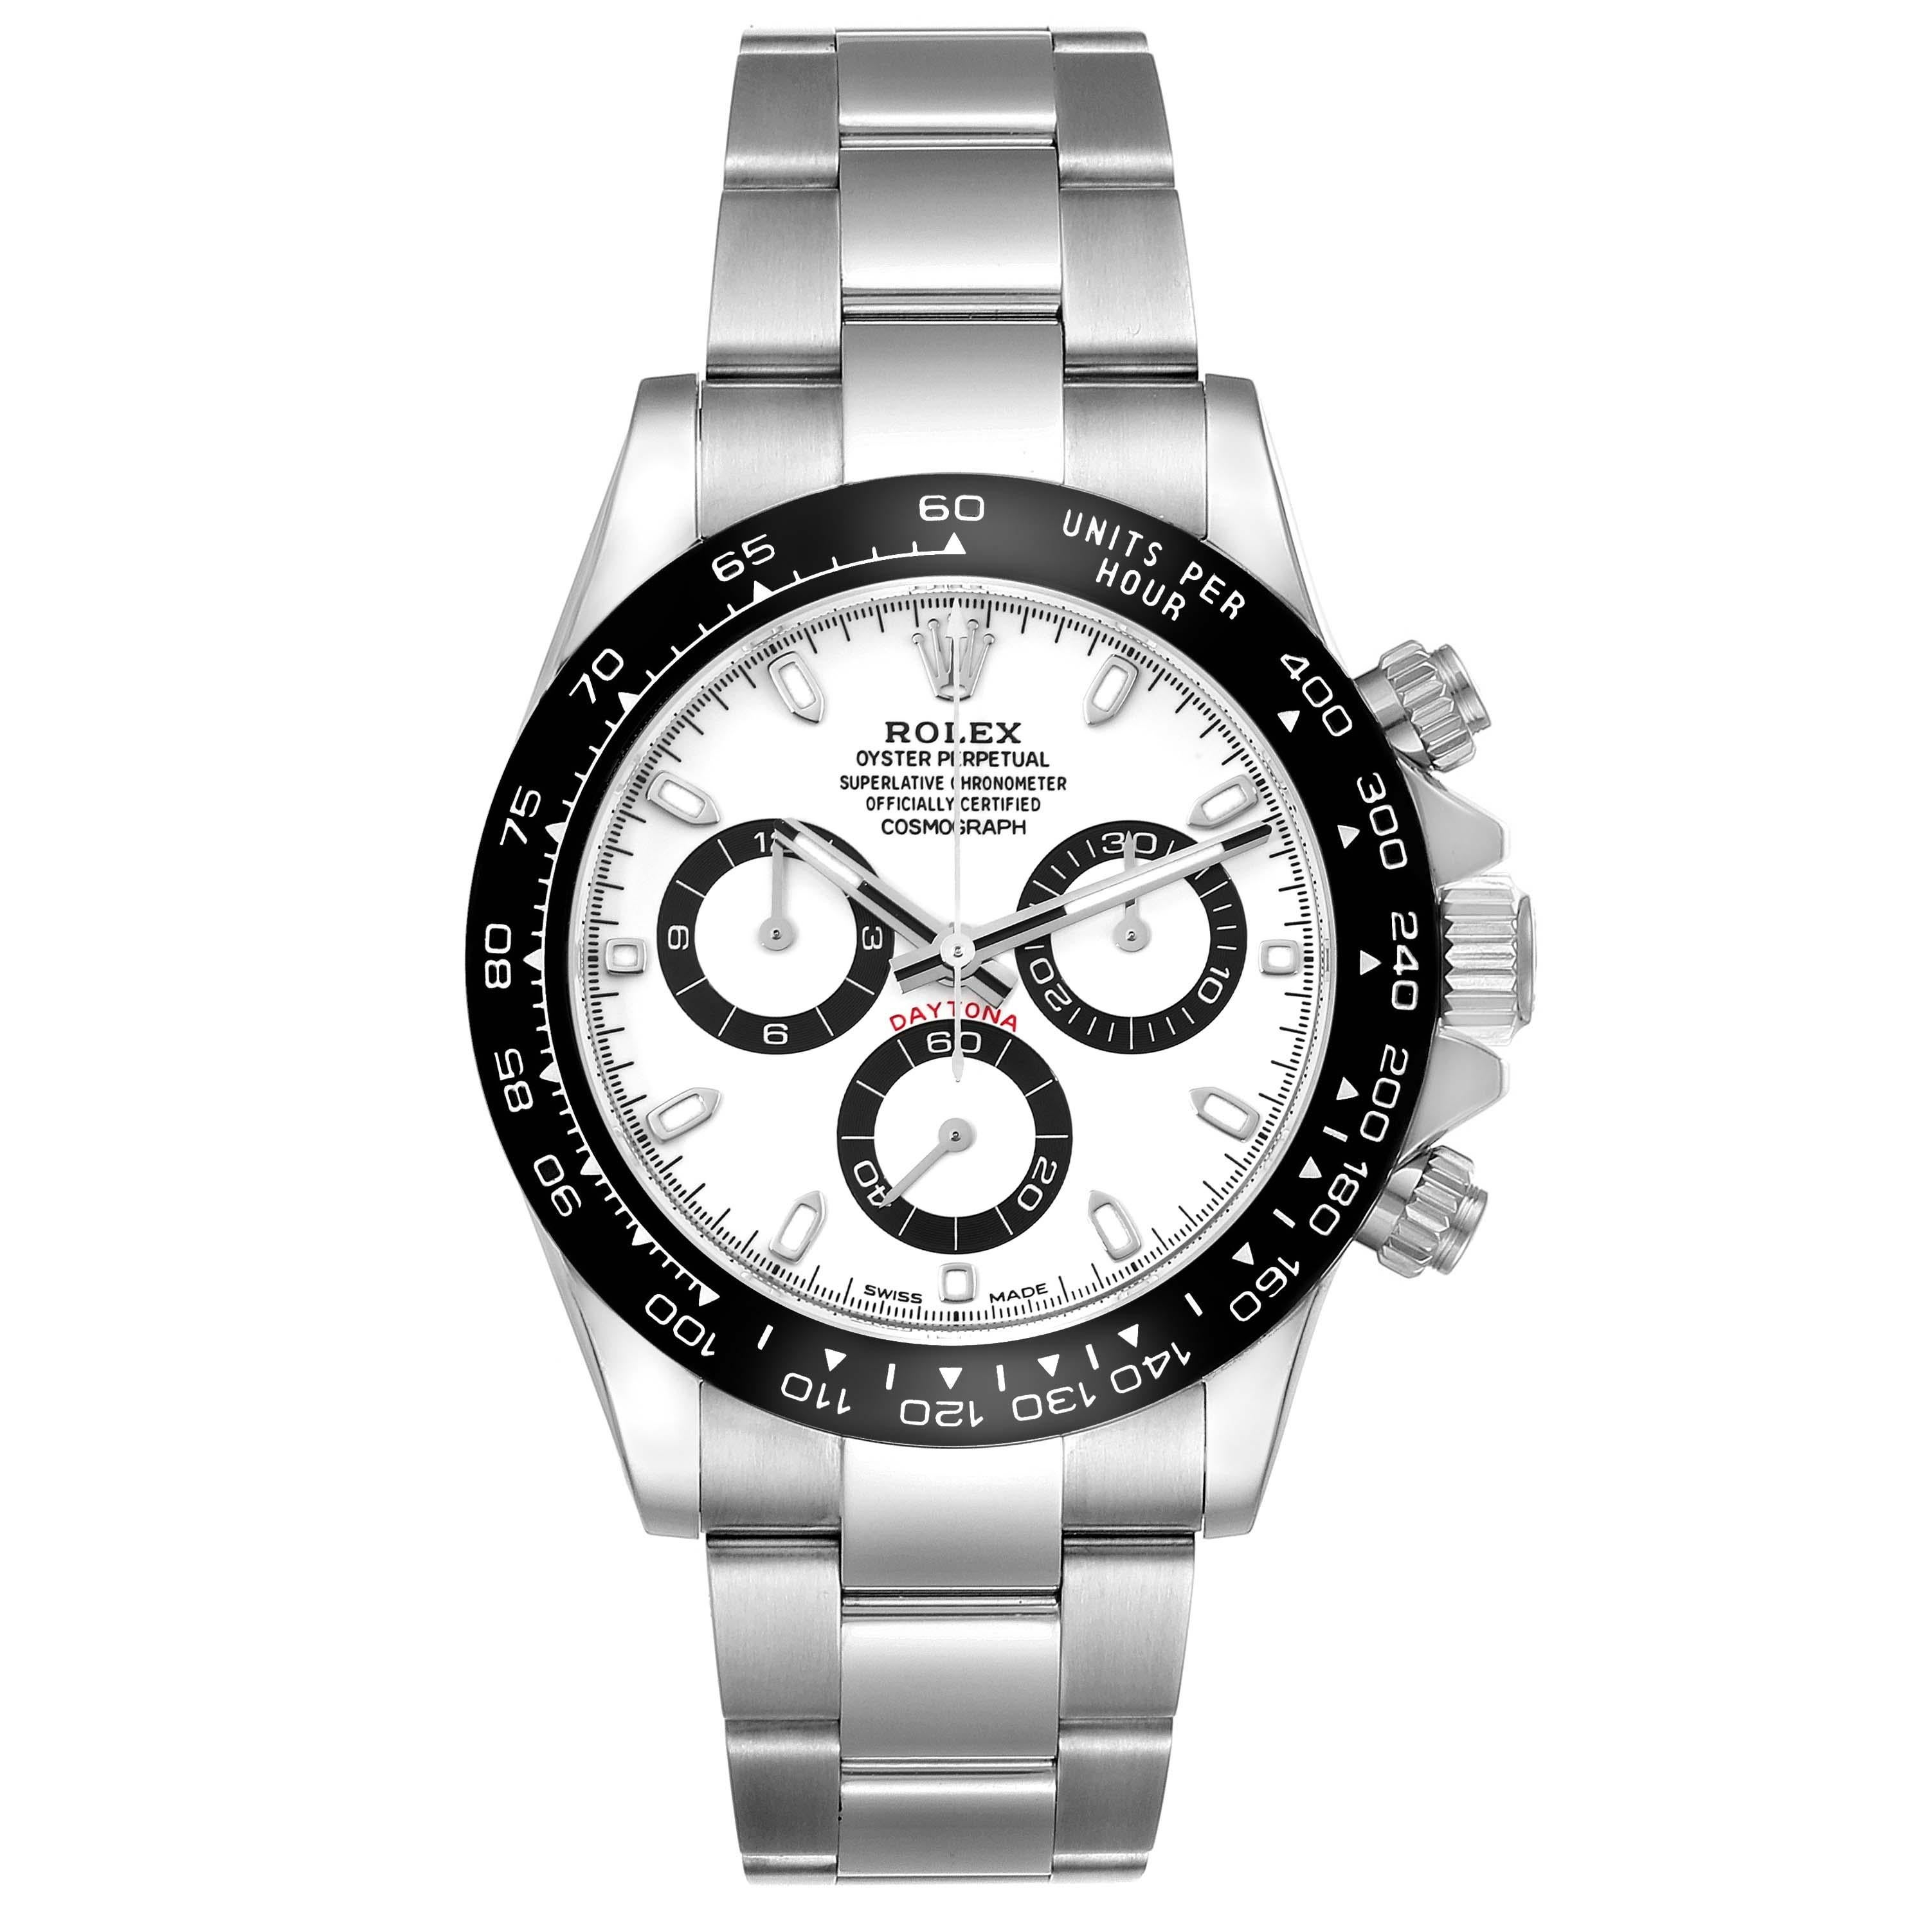 Rolex Daytona Ceramic Bezel White Panda Dial Steel Mens Watch 116500. Officially certified chronometer automatic self-winding chronograph movement. Stainless steel case 40.0 mm in diameter. Screw-down crown and pushers. Black monobloc Cerachrom